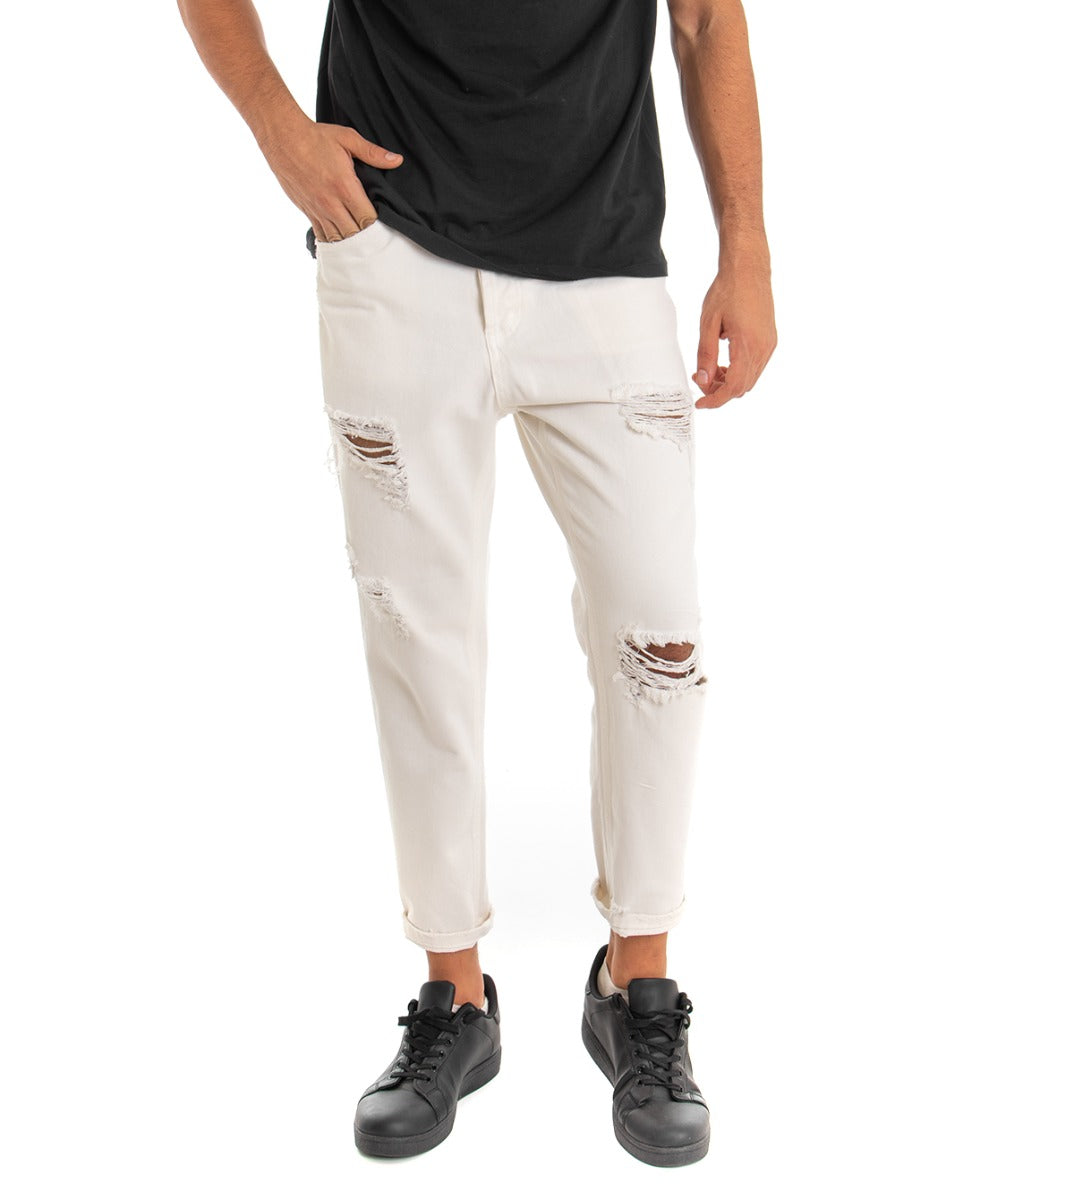 Men's Jeans Trousers Loose Fit Cream With Rips Five Casual Pockets GIOSAL-P3280A